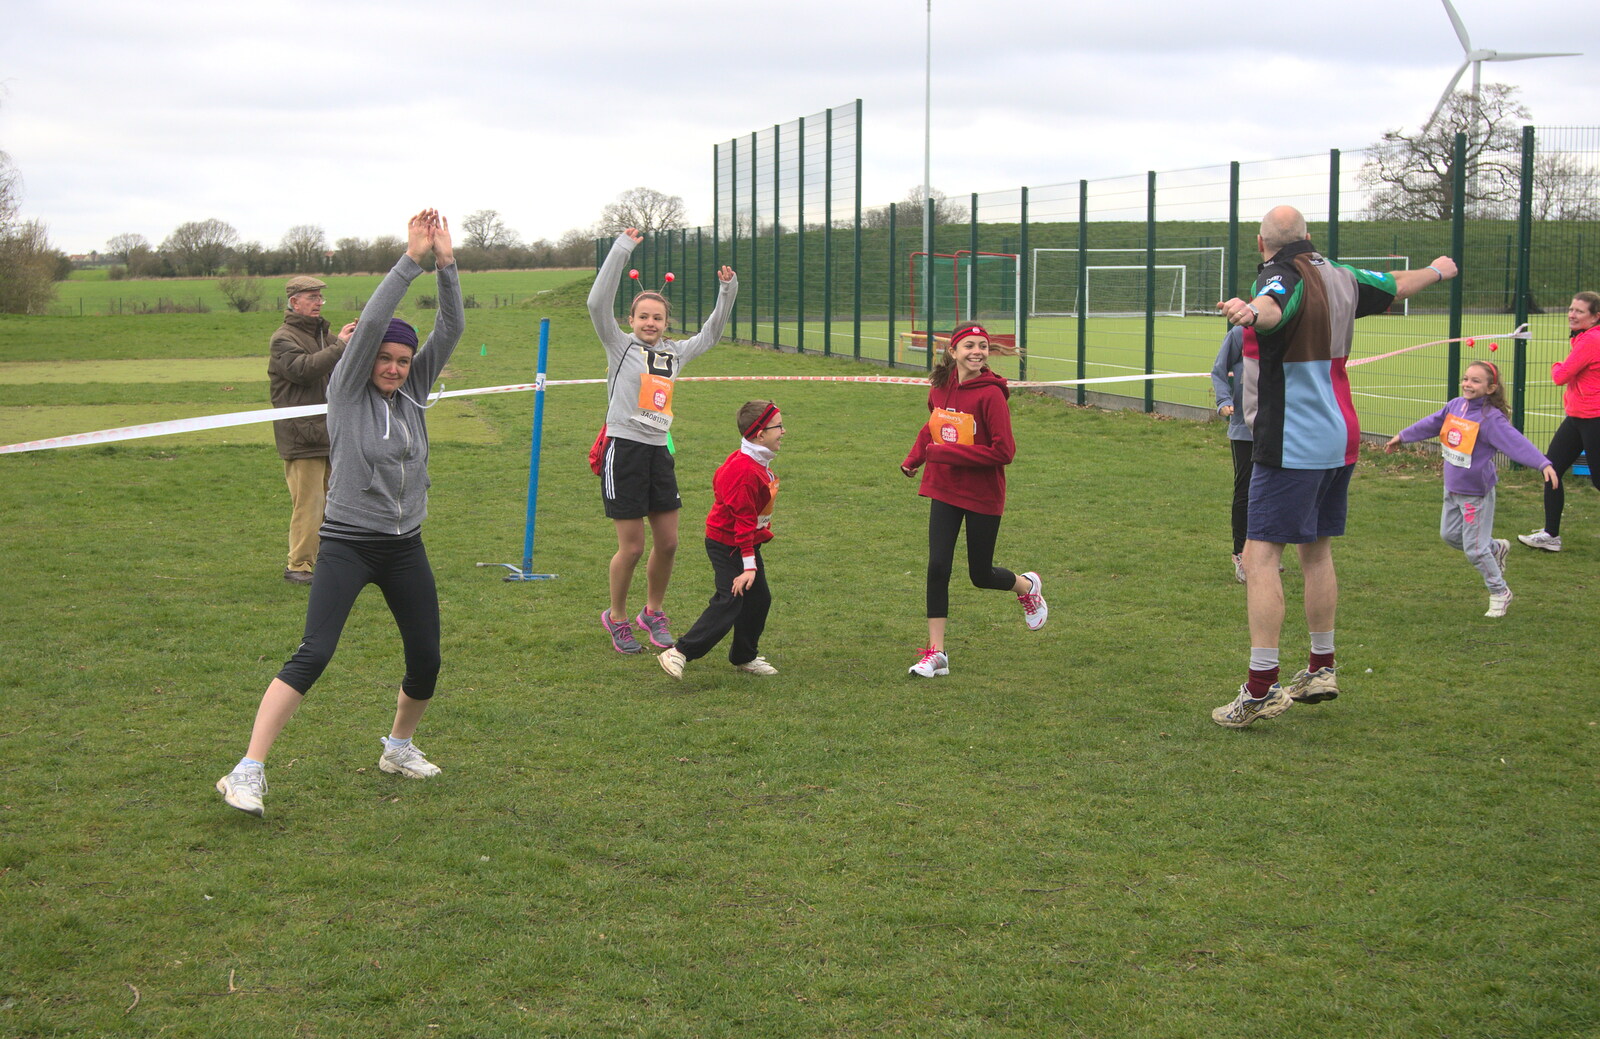 There's a warm-up session to start with from Isobel's Fun Run, Hartismere High, Eye, Suffolk - 23rd March 2014